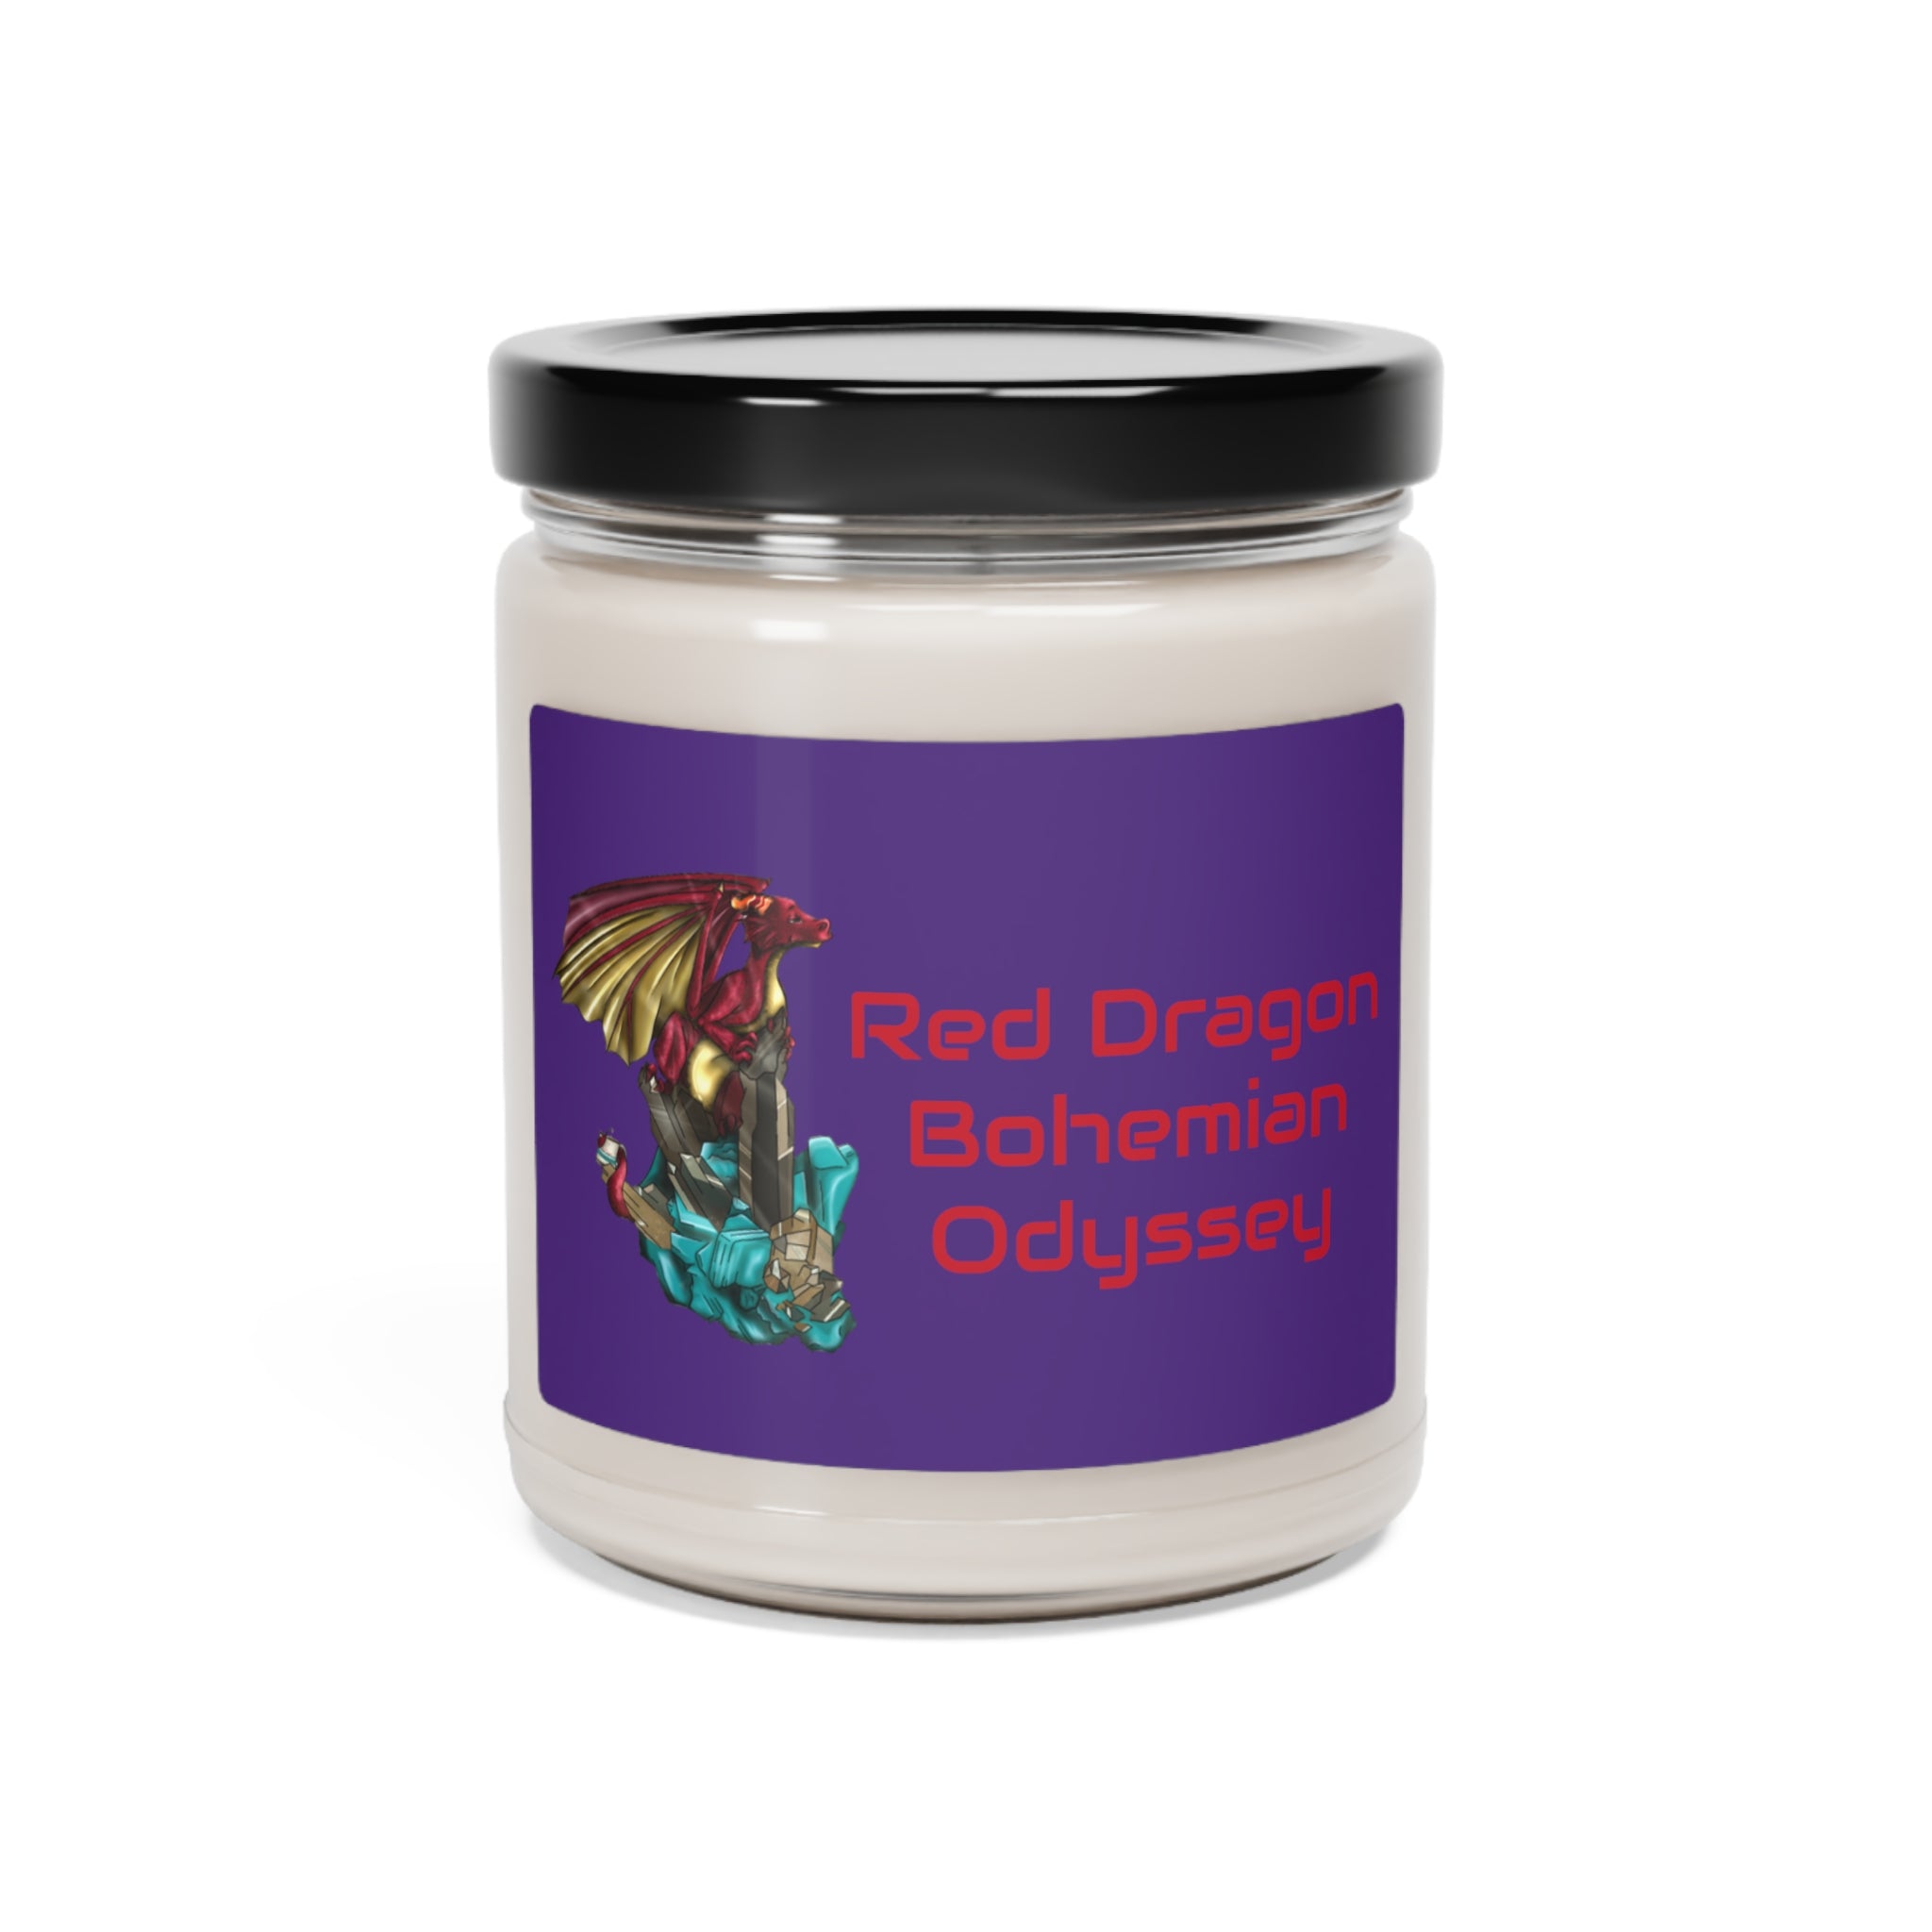 Red Dragon Logo Scented Soy Candle, 9oz